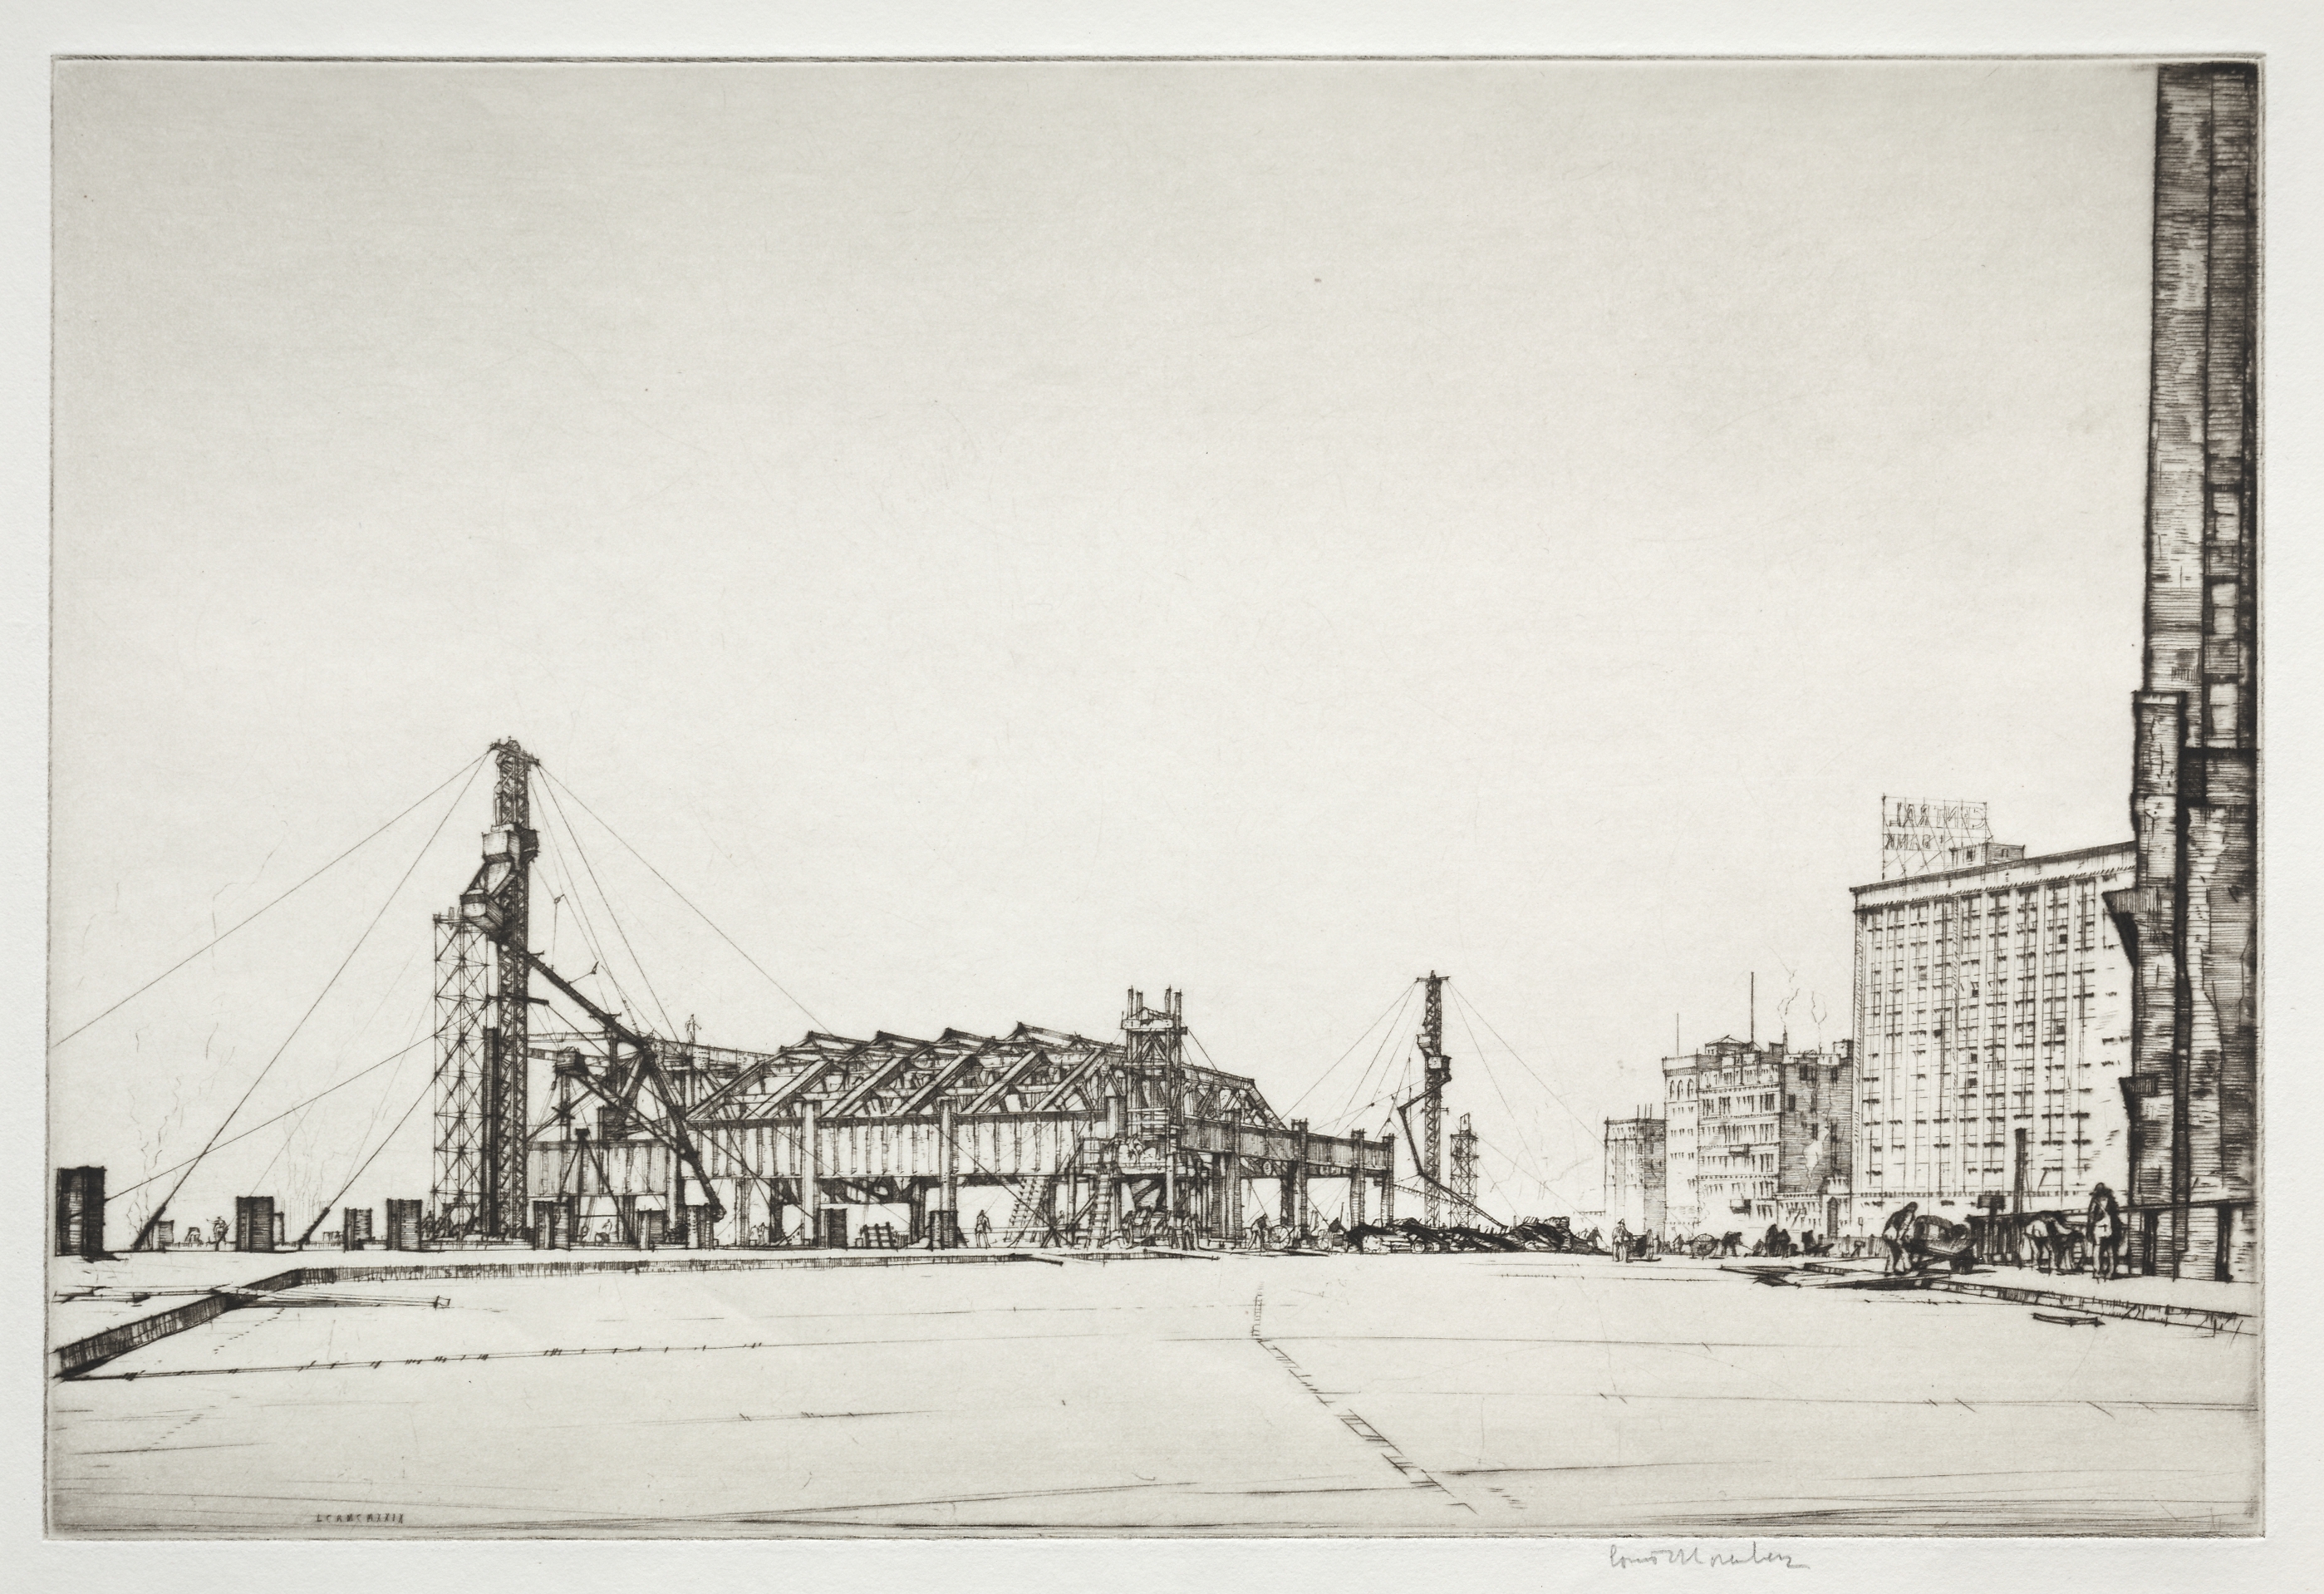 Railroad Construction, Cleveland:  Station and Prospect Avenue, October 1928